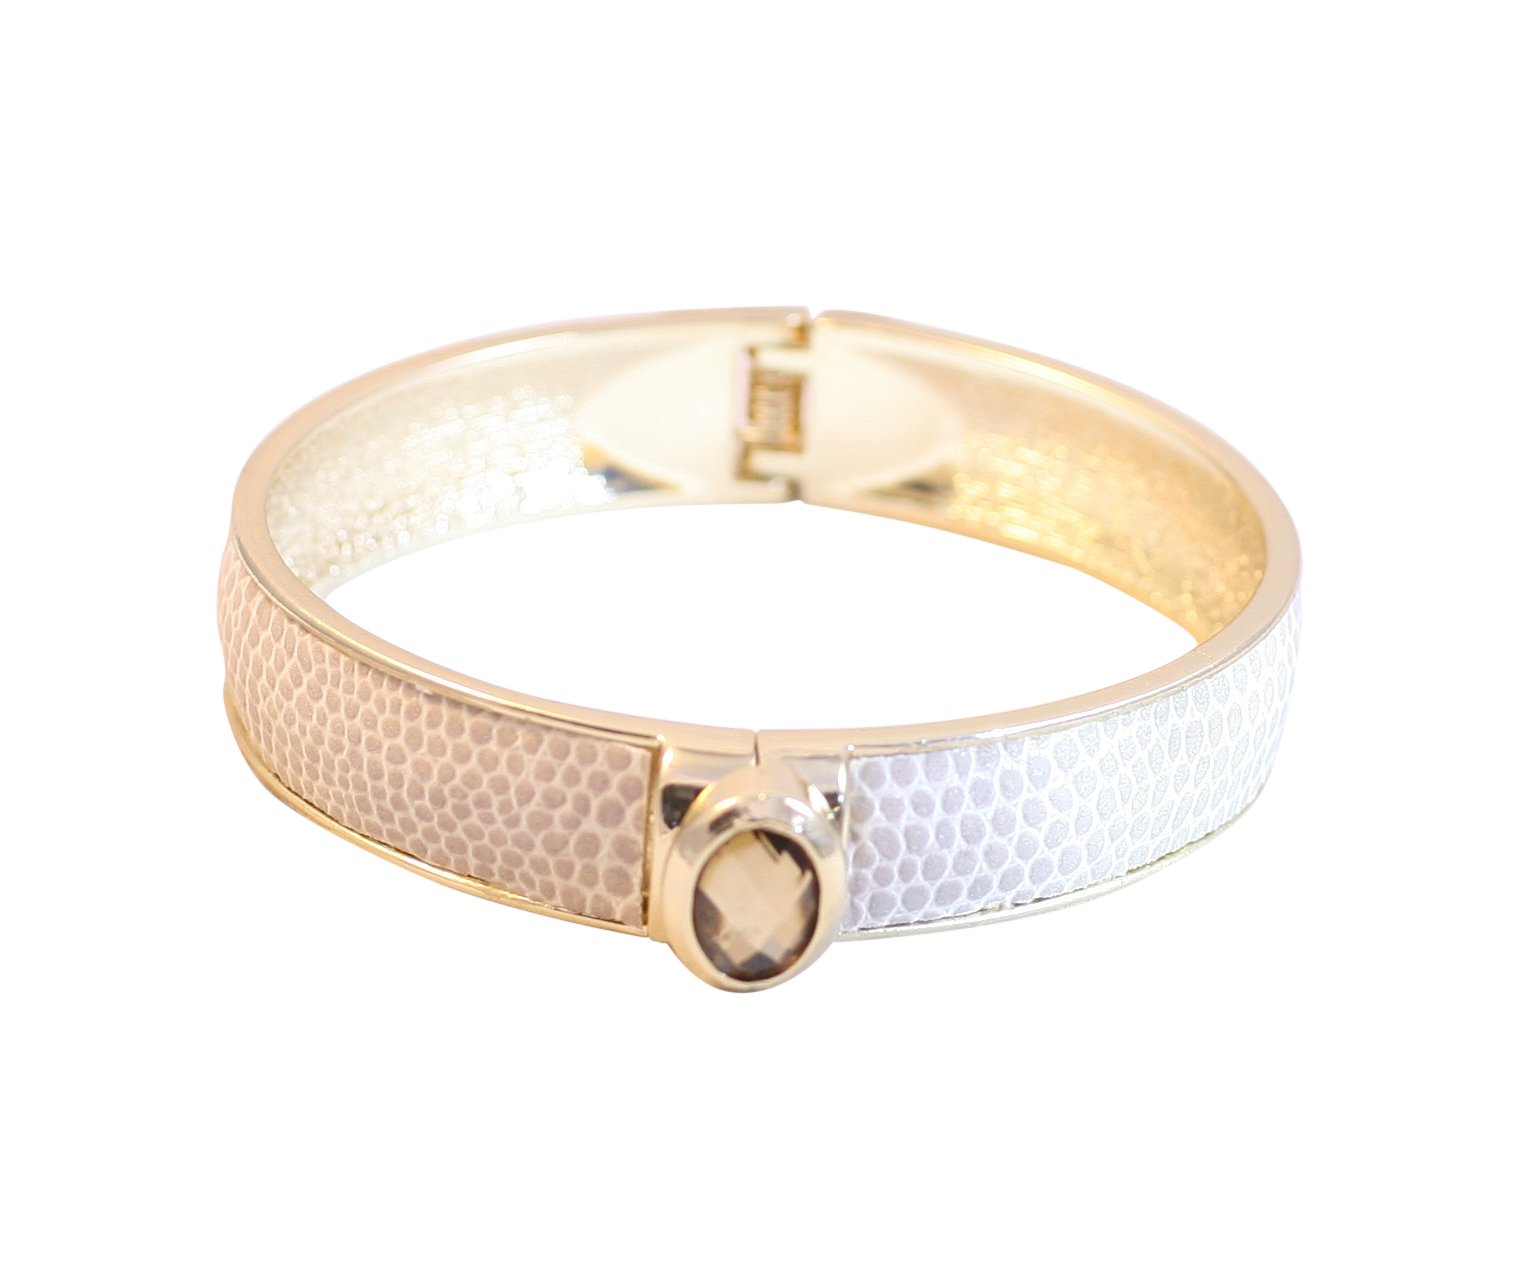 Shimmering centered oval jeweled designer style bracelet bangle finished with a snakeskin-like texture accent in gold-tone 629B-82033